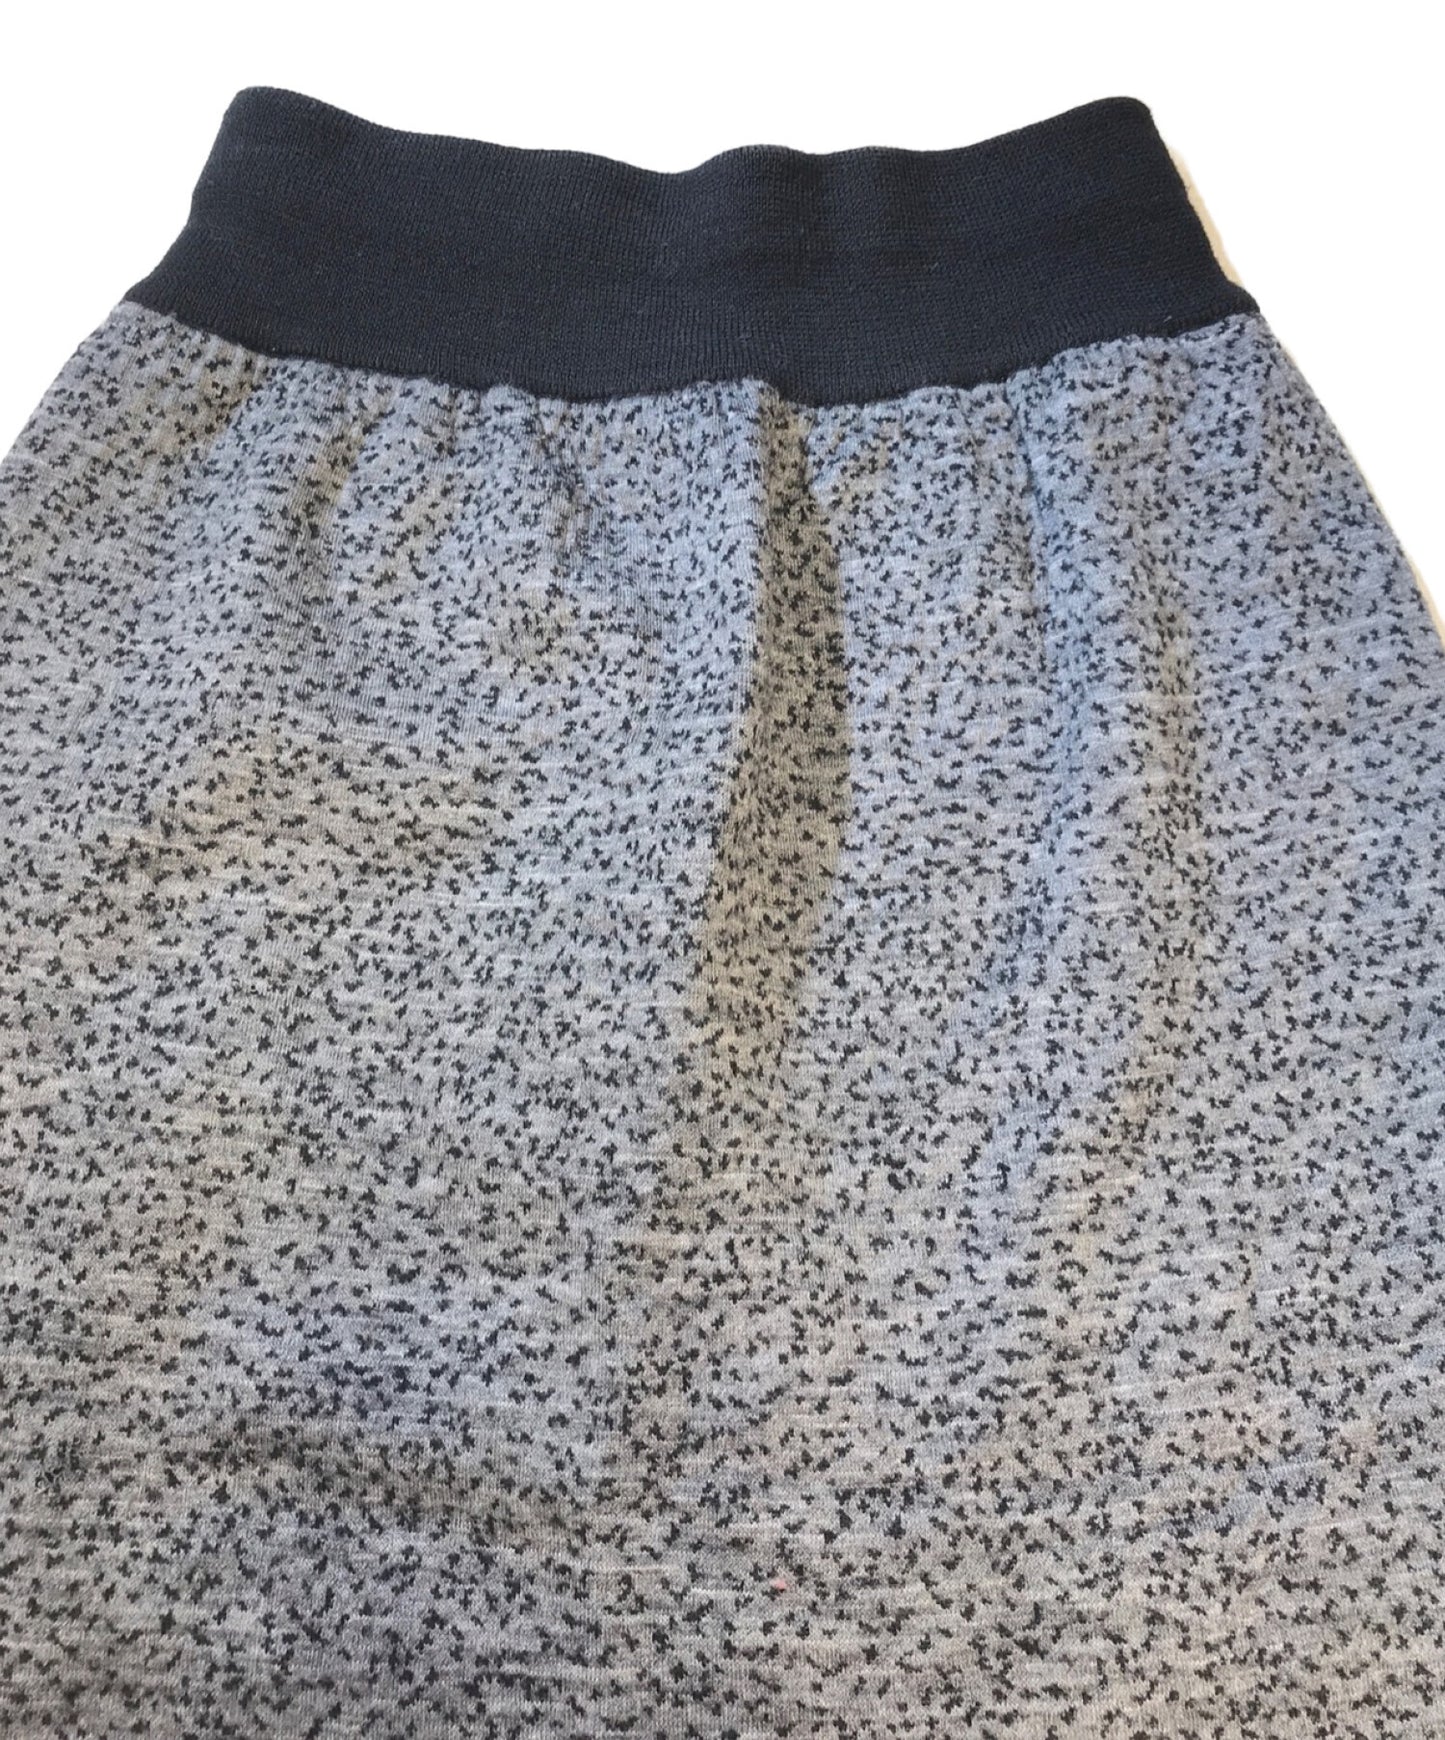 [Pre-owned] ISSEY MIYAKE [OLD] 80's Knit Skirt LN64707